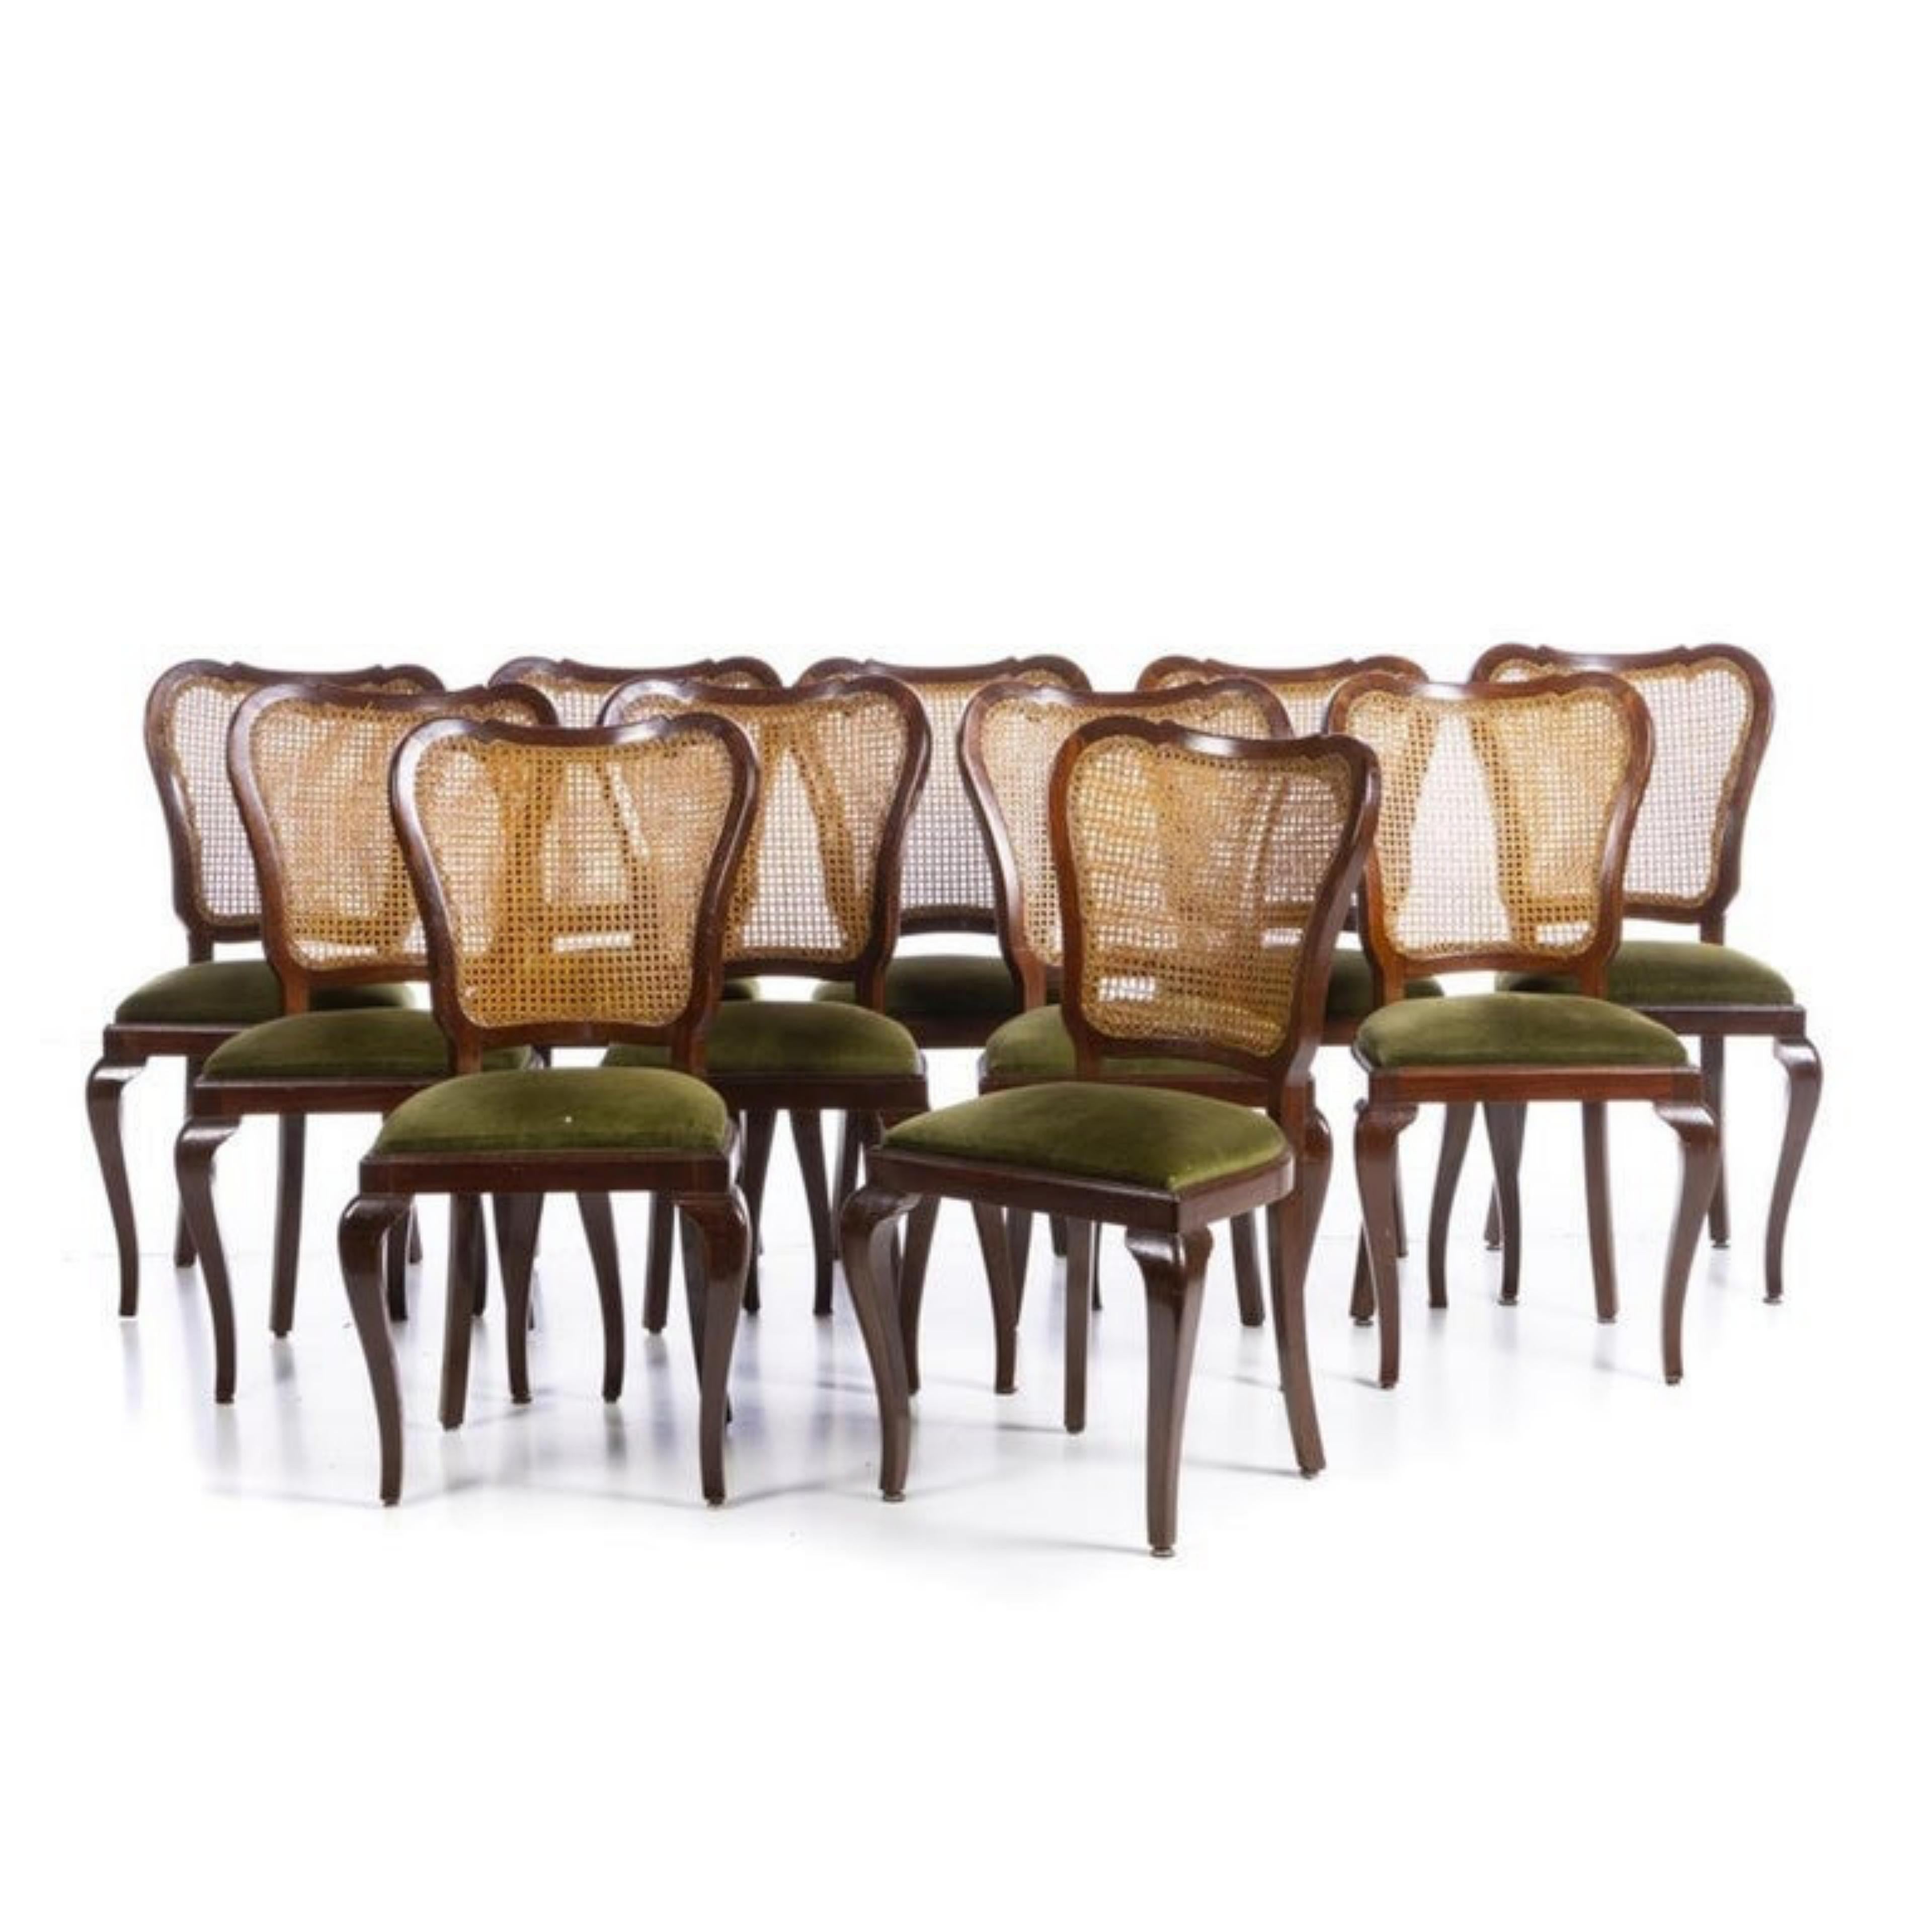 Hand-Crafted 11 Portuguese Chairs from the 20th Century in Mahogany